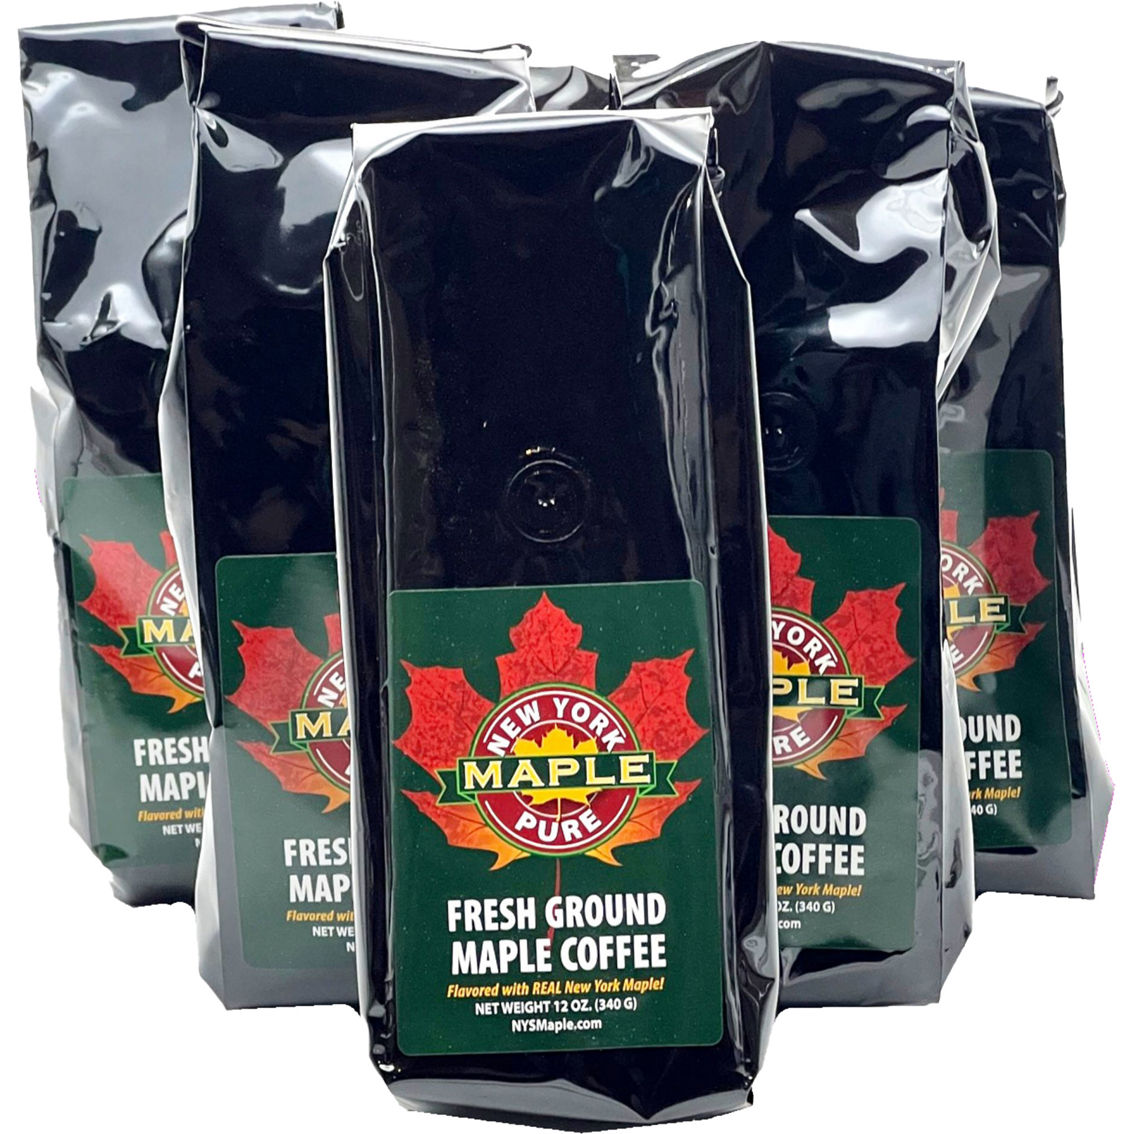 Sterling Valley Maple, Maple Roasted Ground Coffee Qty 6, 12 Oz. Each ...